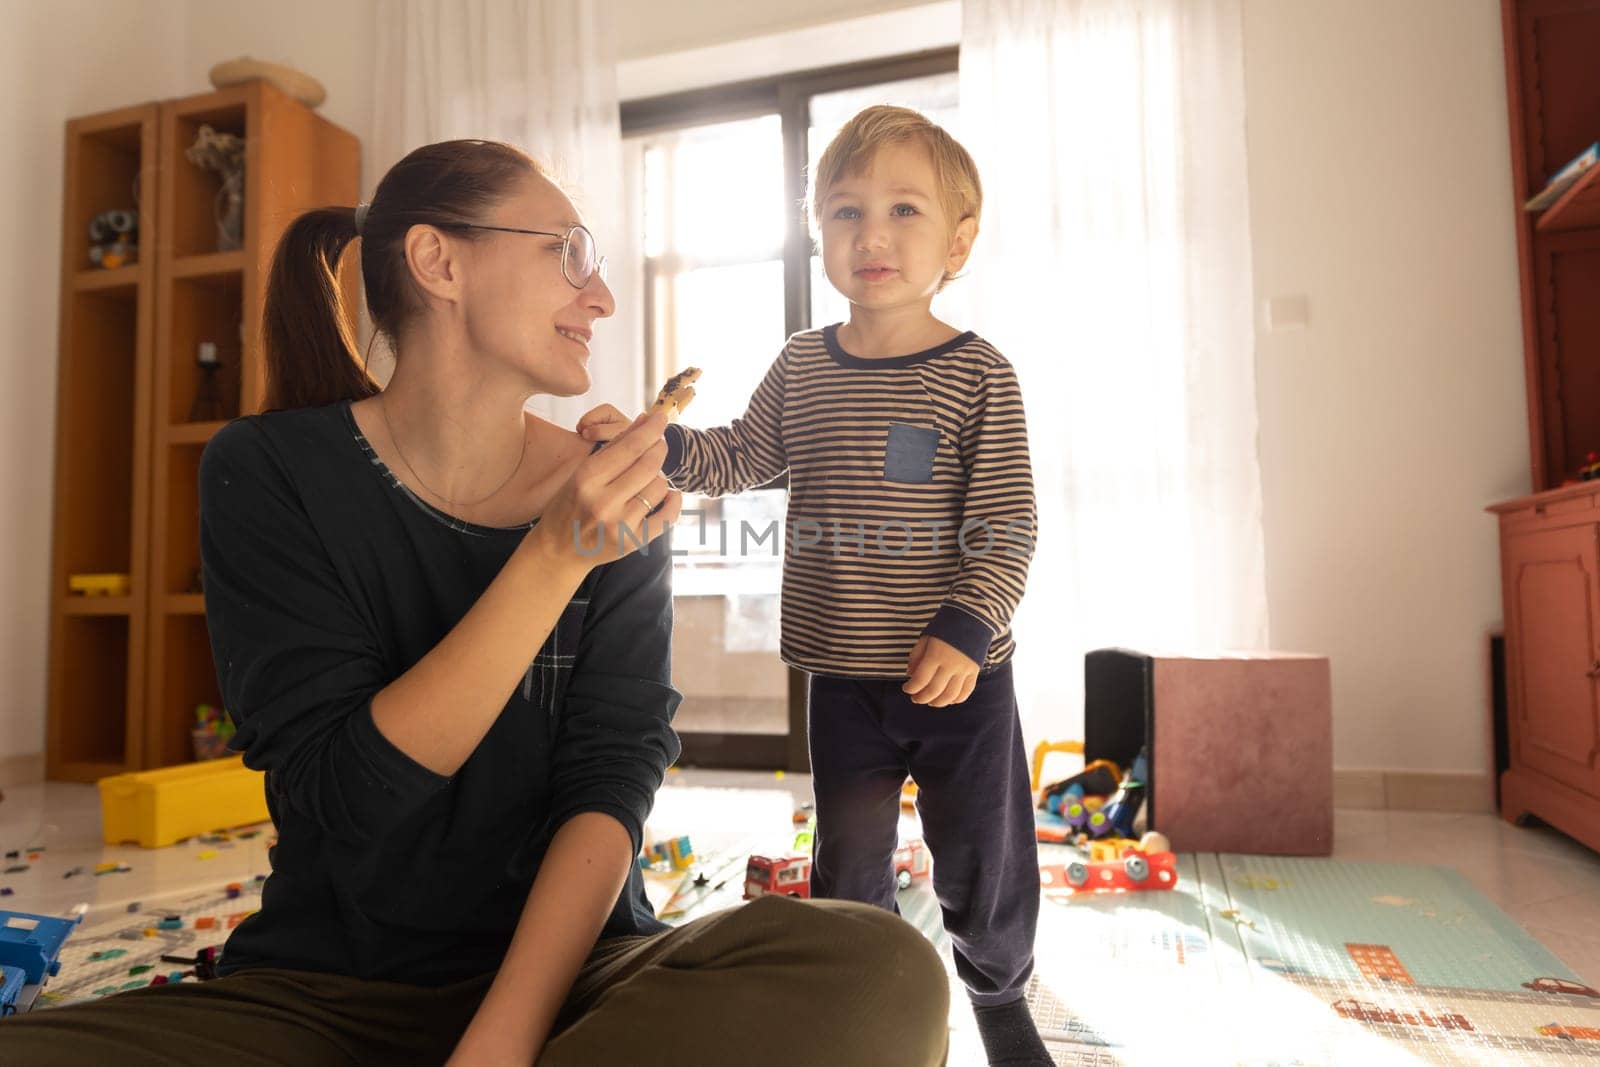 Mother and son in the playroom - a woman holds a cookie and a boy looks ahead. Mid shot